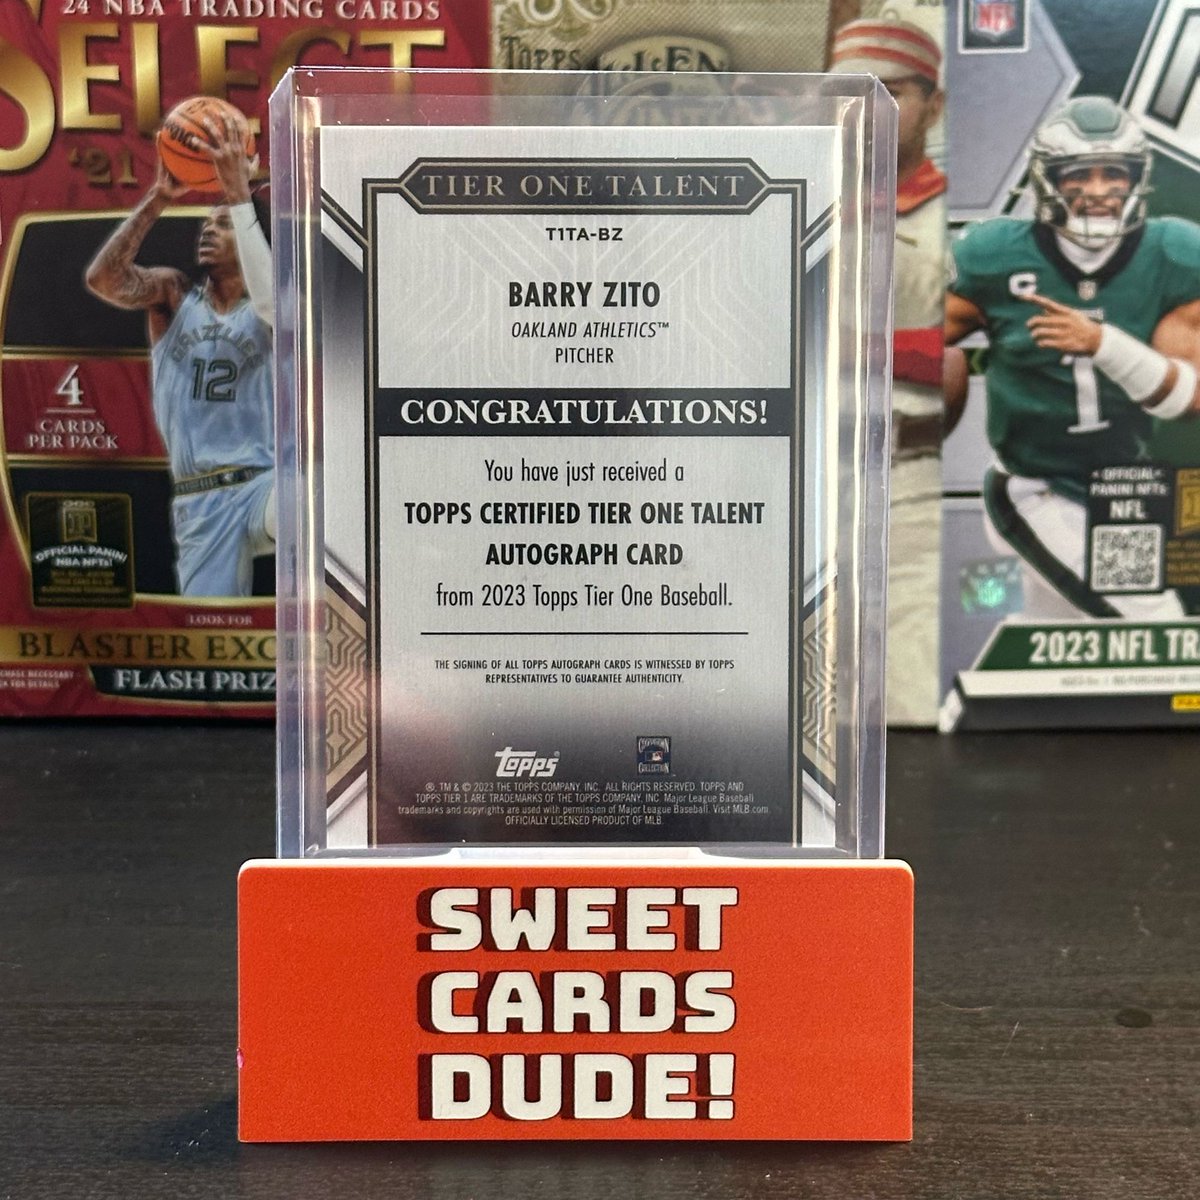 Sweet 2023 @topps Tier One Baseball Barry Zito on card auto 08/25
•
•
•
•
•
 #packopening #sportscards #whodoyoucollect #breaks #thehobby #collecting #sportscardsforsale #Sportscardcollecting #sportscardinvesting #SweetCardsDude